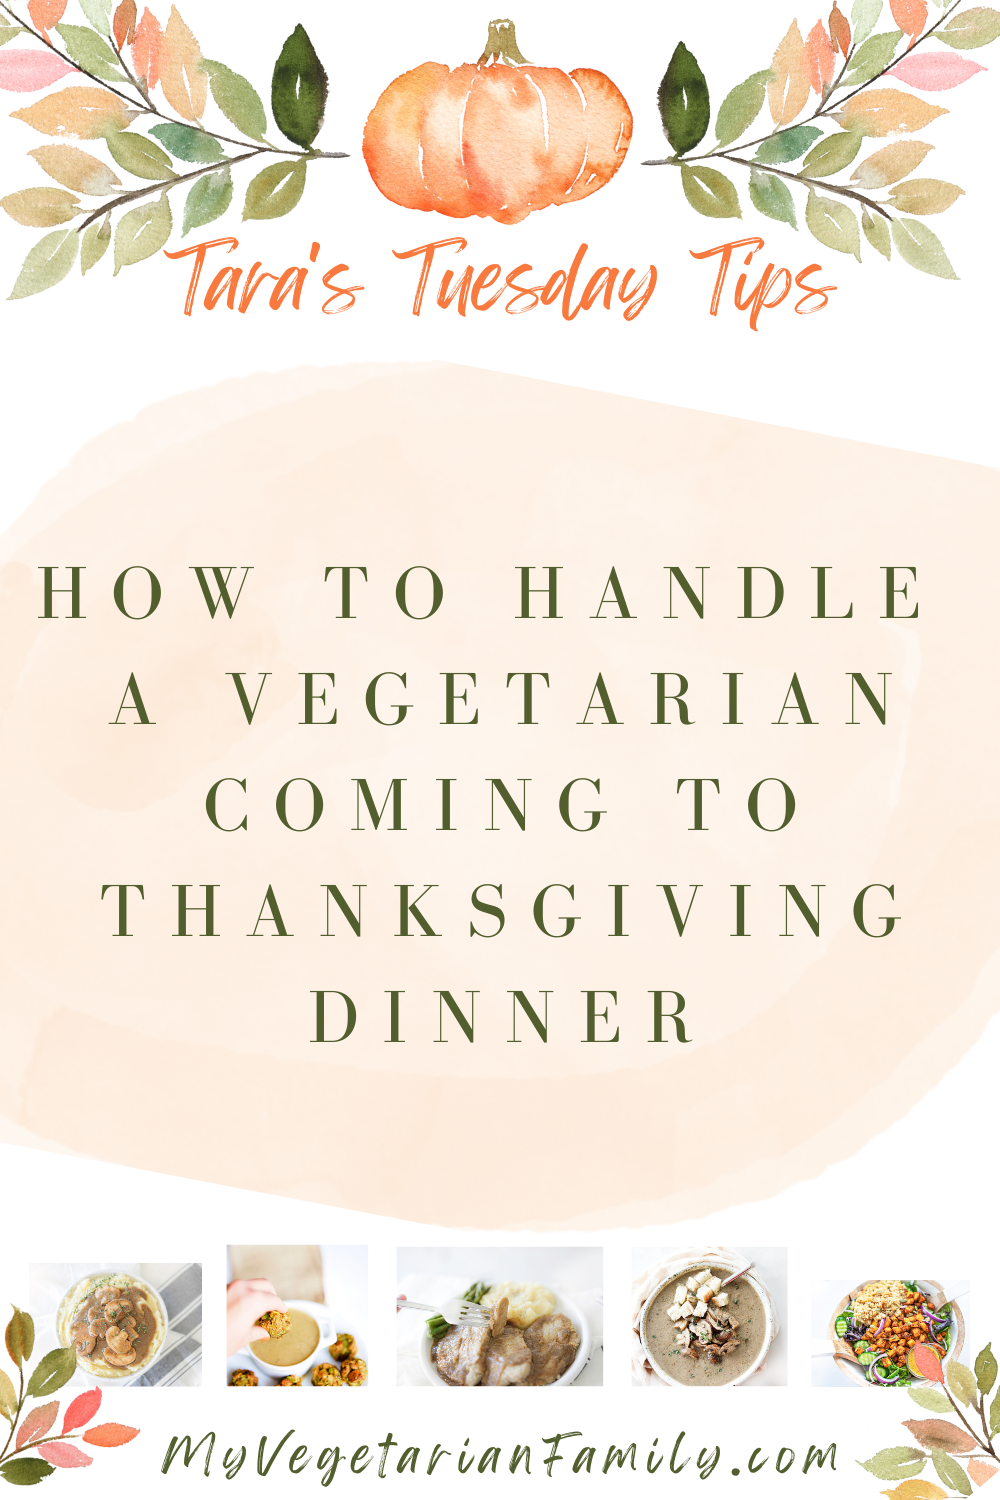 How to Handle a Vegetarian Coming to Thanksgiving Dinner